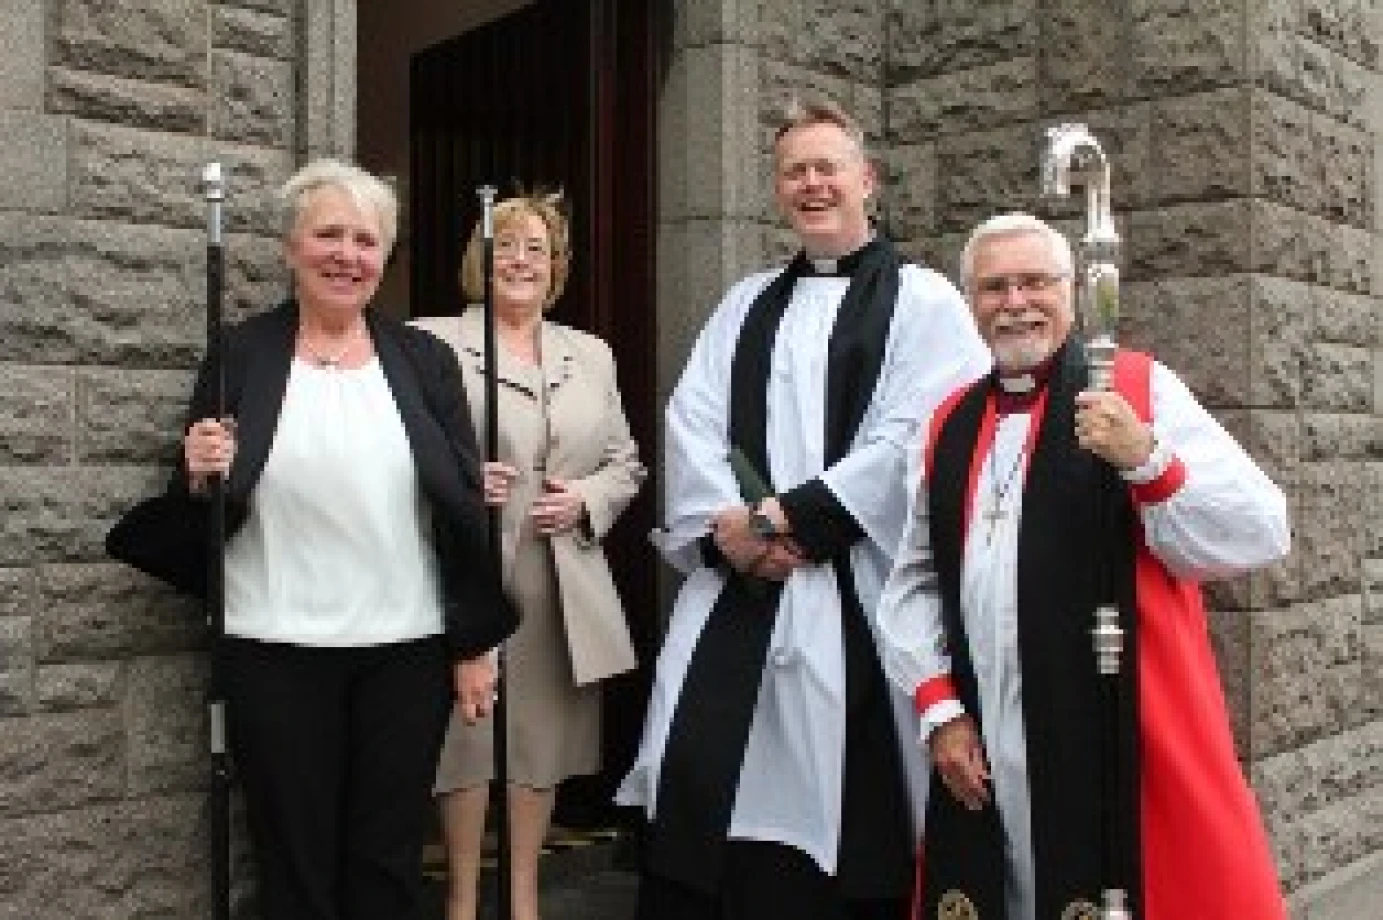 St John’s Orangefield welcomes a new rector